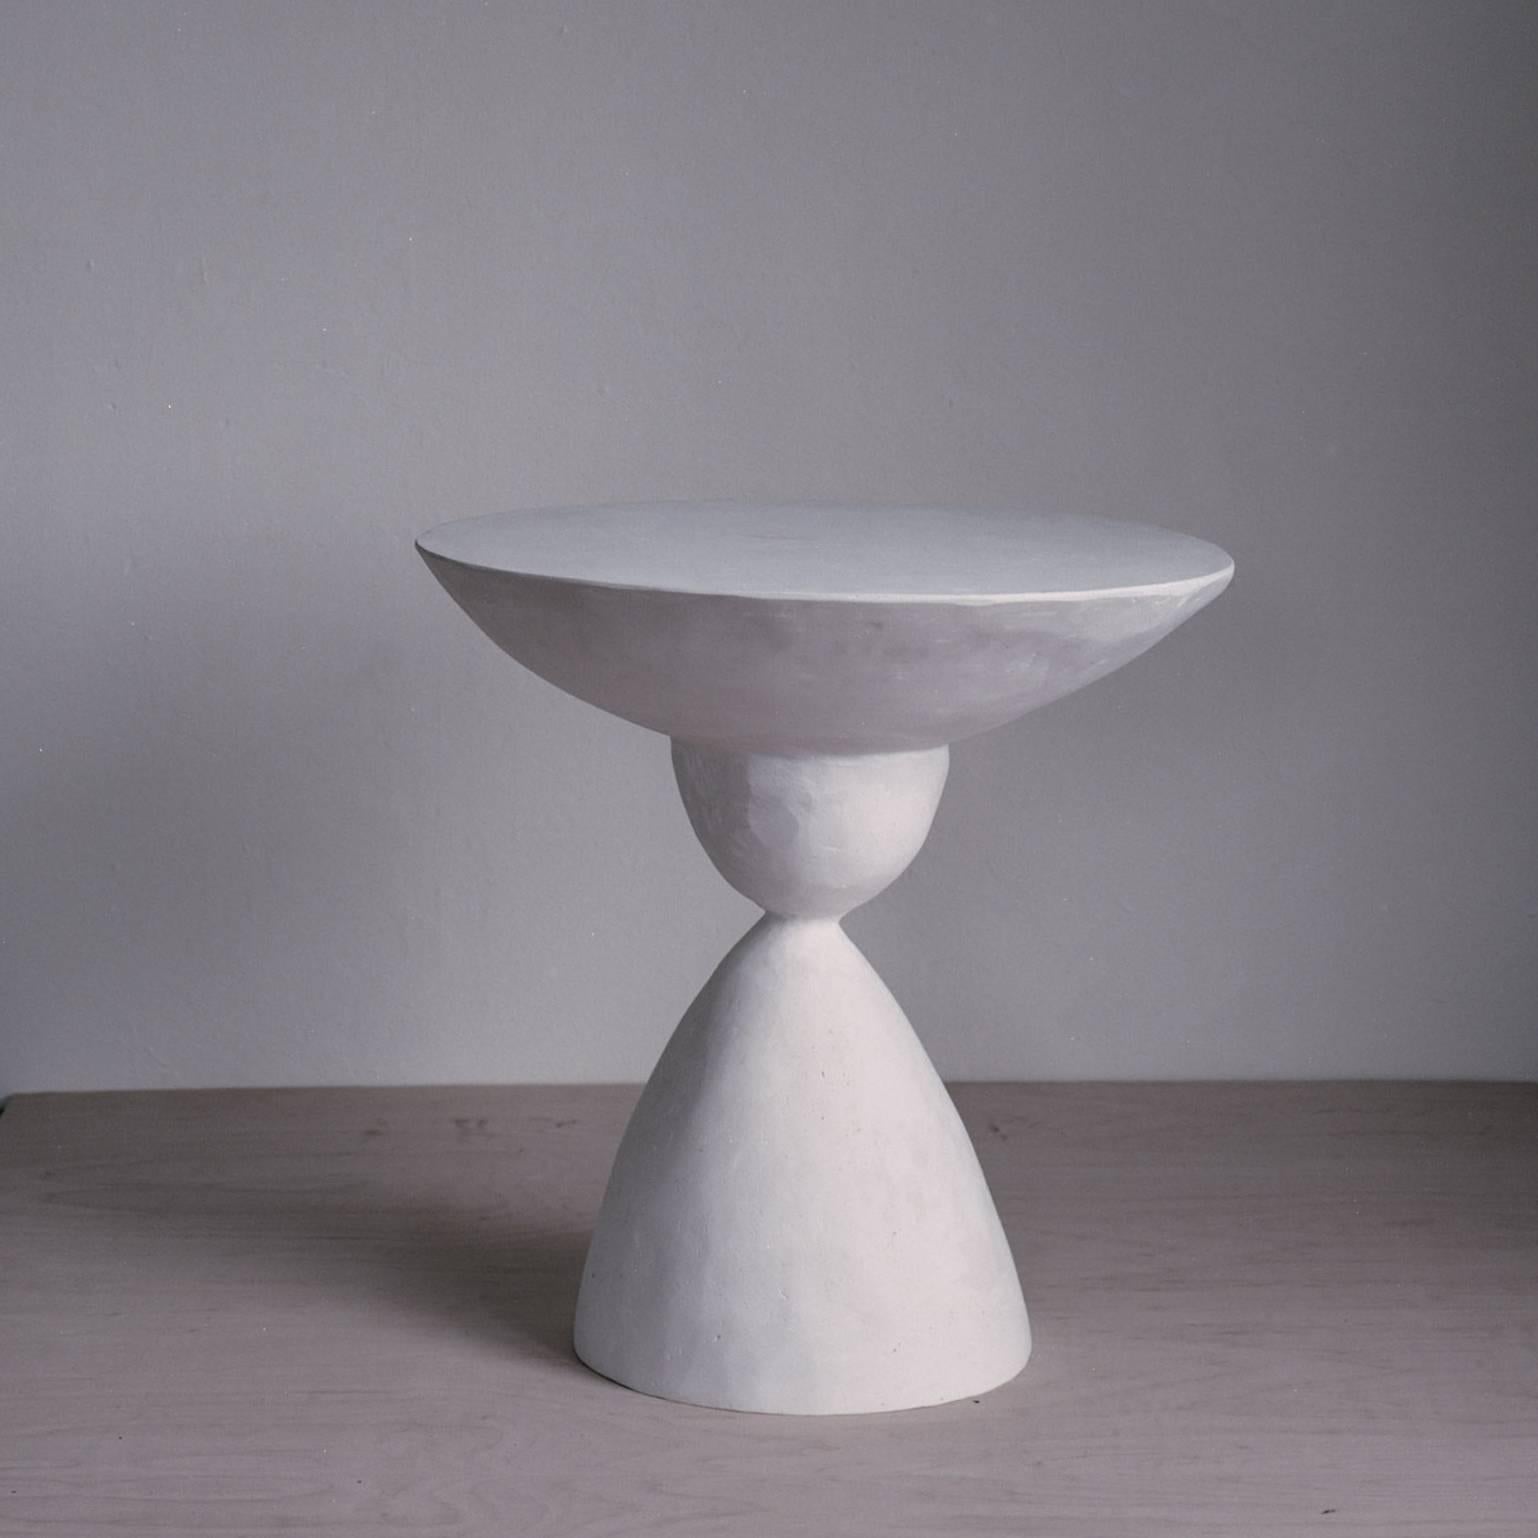 The Marasai side table is cast in a five part process and sculpted from concrete and plaster and sealed with lime. Because it is sculpted by hand in our studio, each form varies slightly in texture from the next.

Dimensions: 20